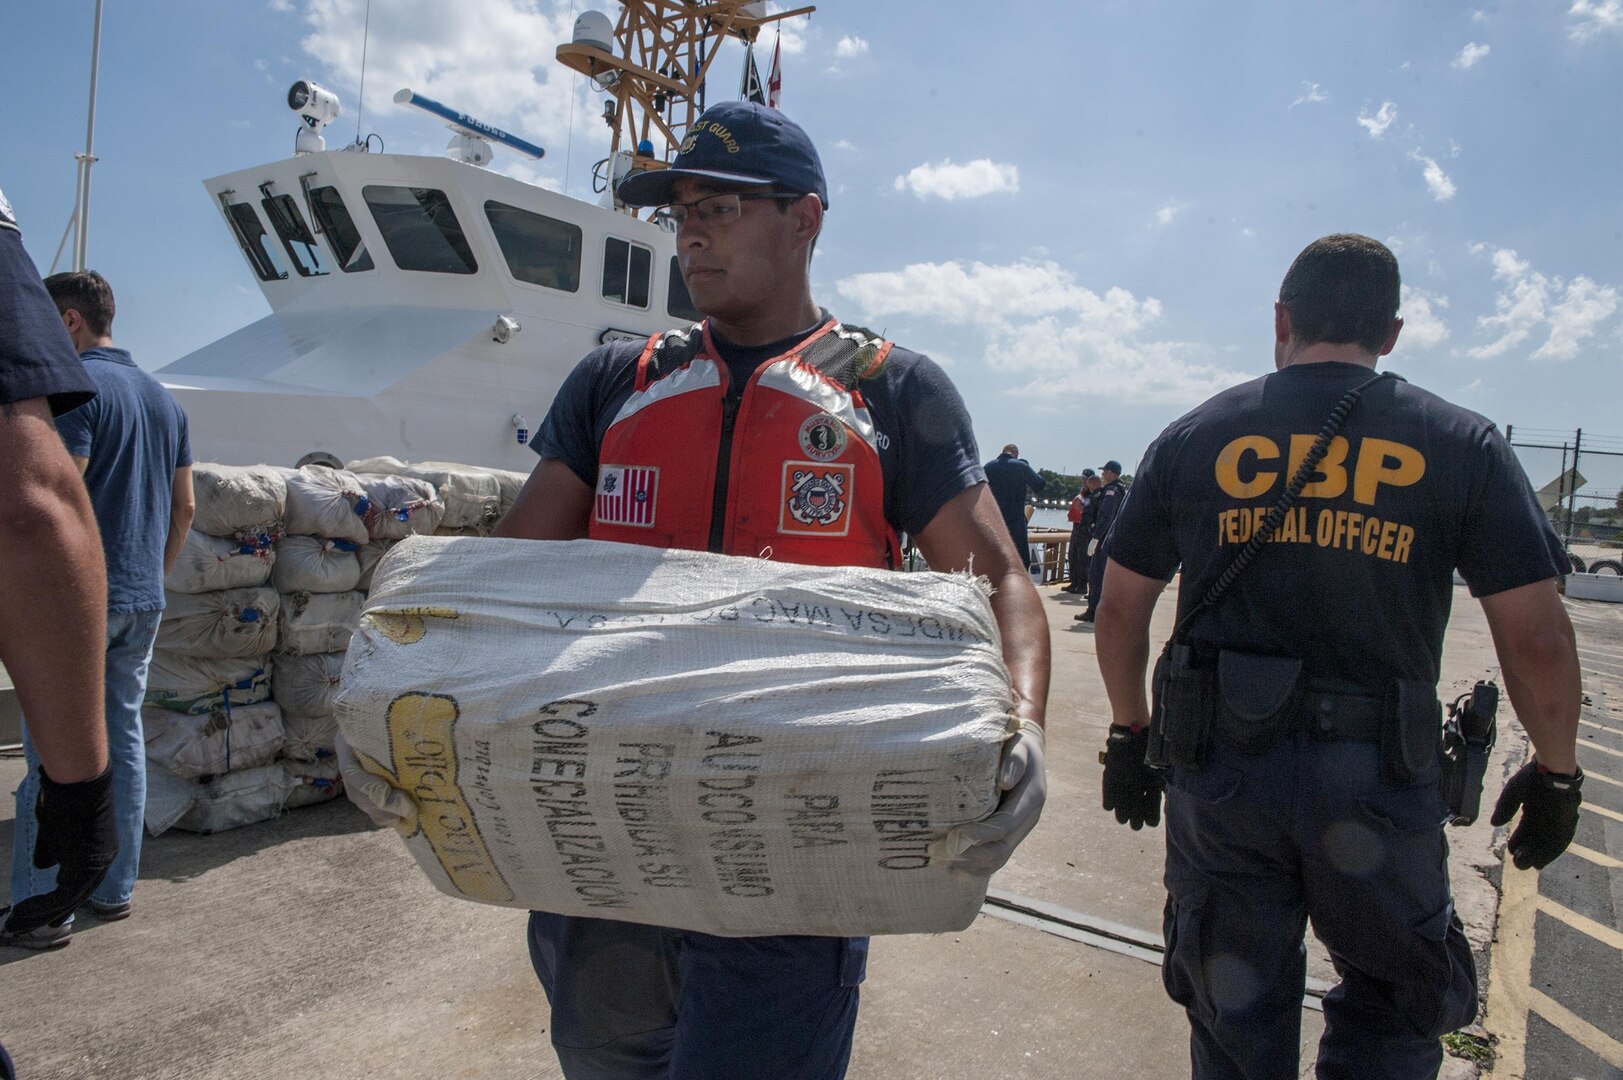 A crew member from Coast Guard Cutter Tarpon, an 87-foot Coast Patrol Boat homeported in St. Petersburg, Florida, and his crew offload 1,735 kilograms of cocaine, an estimated wholesale value of $56 million, Wednesday, May 3, 2017 at Coast Guard Sector St. Petersburg, Florida. The contraband was interdicted during four separate cases supporting Operation Martillo, a joint interagency and multi-national collaborative effort among 14 Western Hemisphere and European nations to stop the flow of illicit cargo by Transnational Criminal Organizations. (U.S. Coast Guard photo by Petty Officer 1st Class Michael De Nyse)